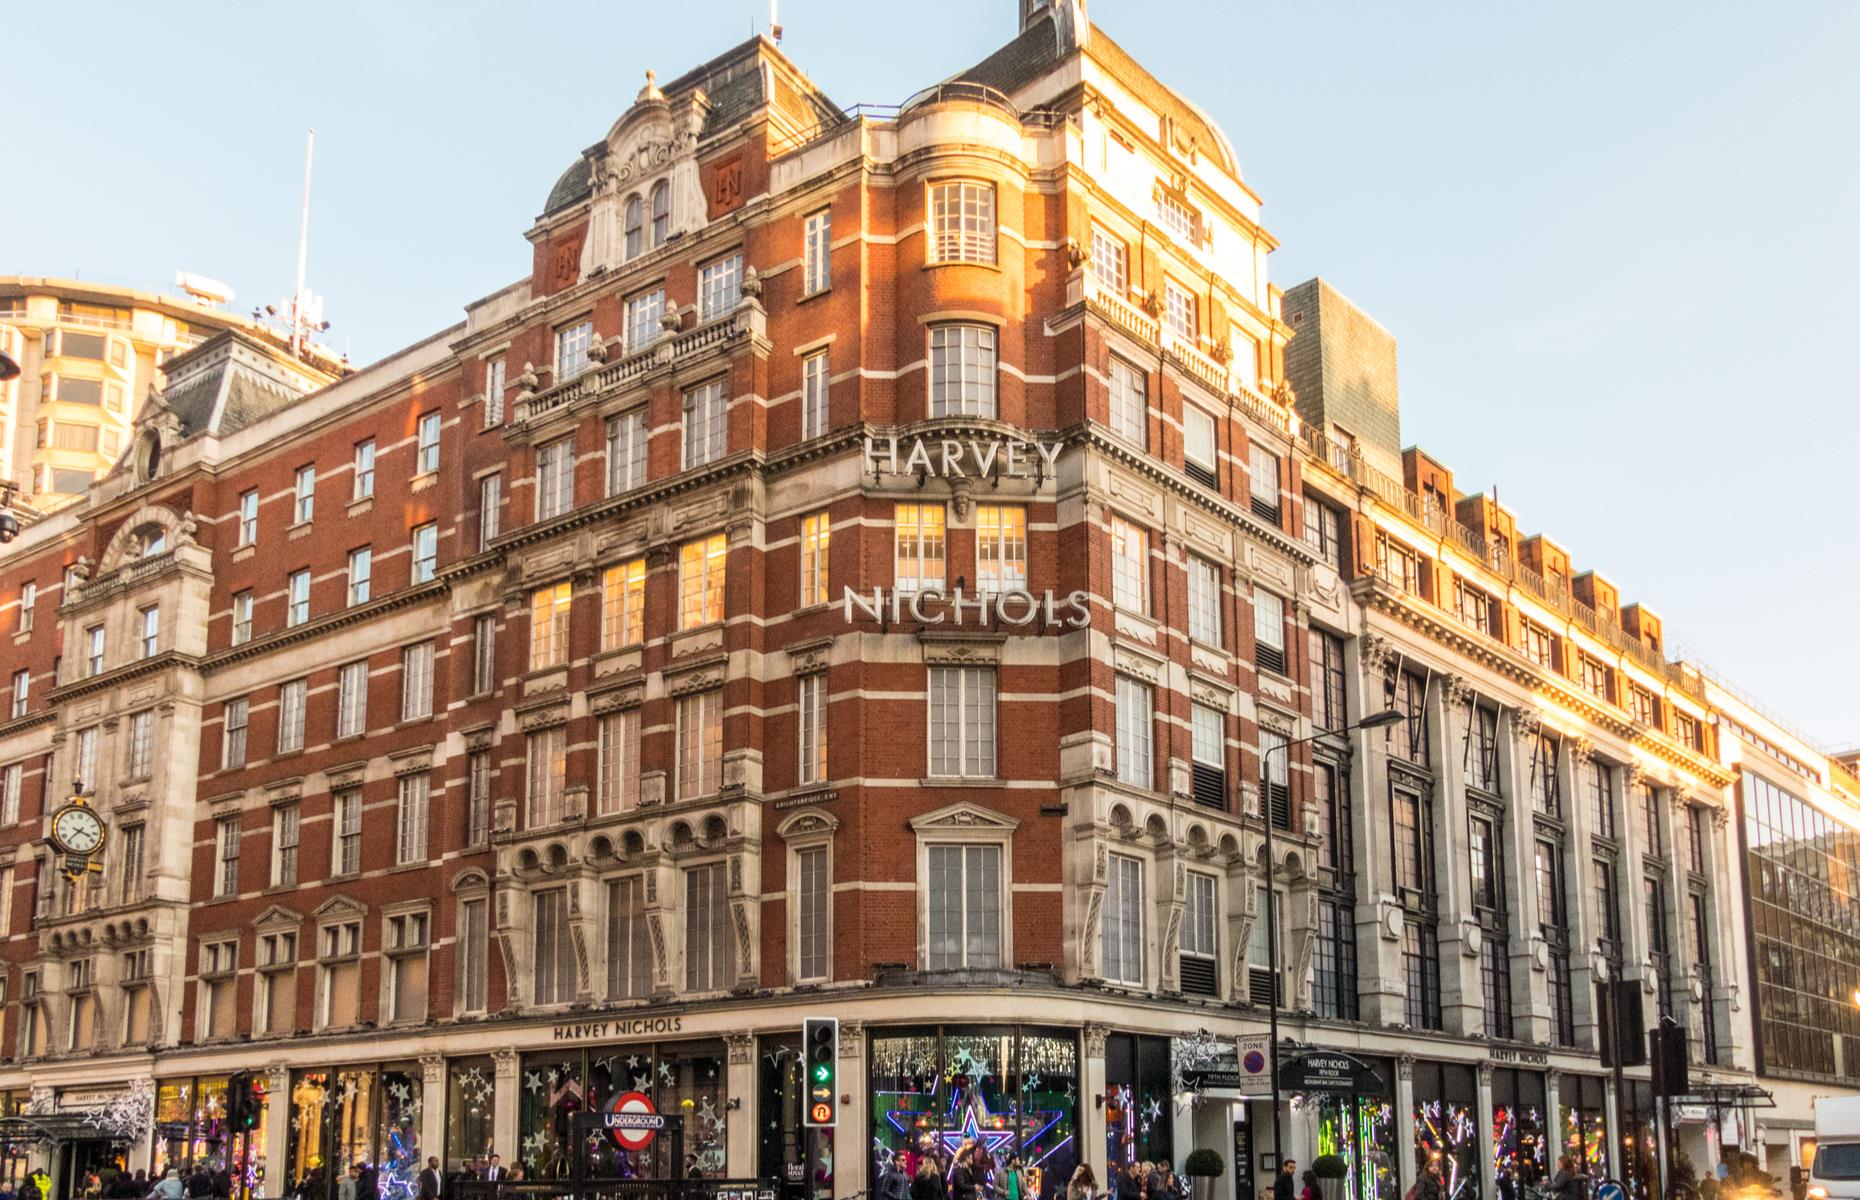 Harvey Nichols moves into foreign hands